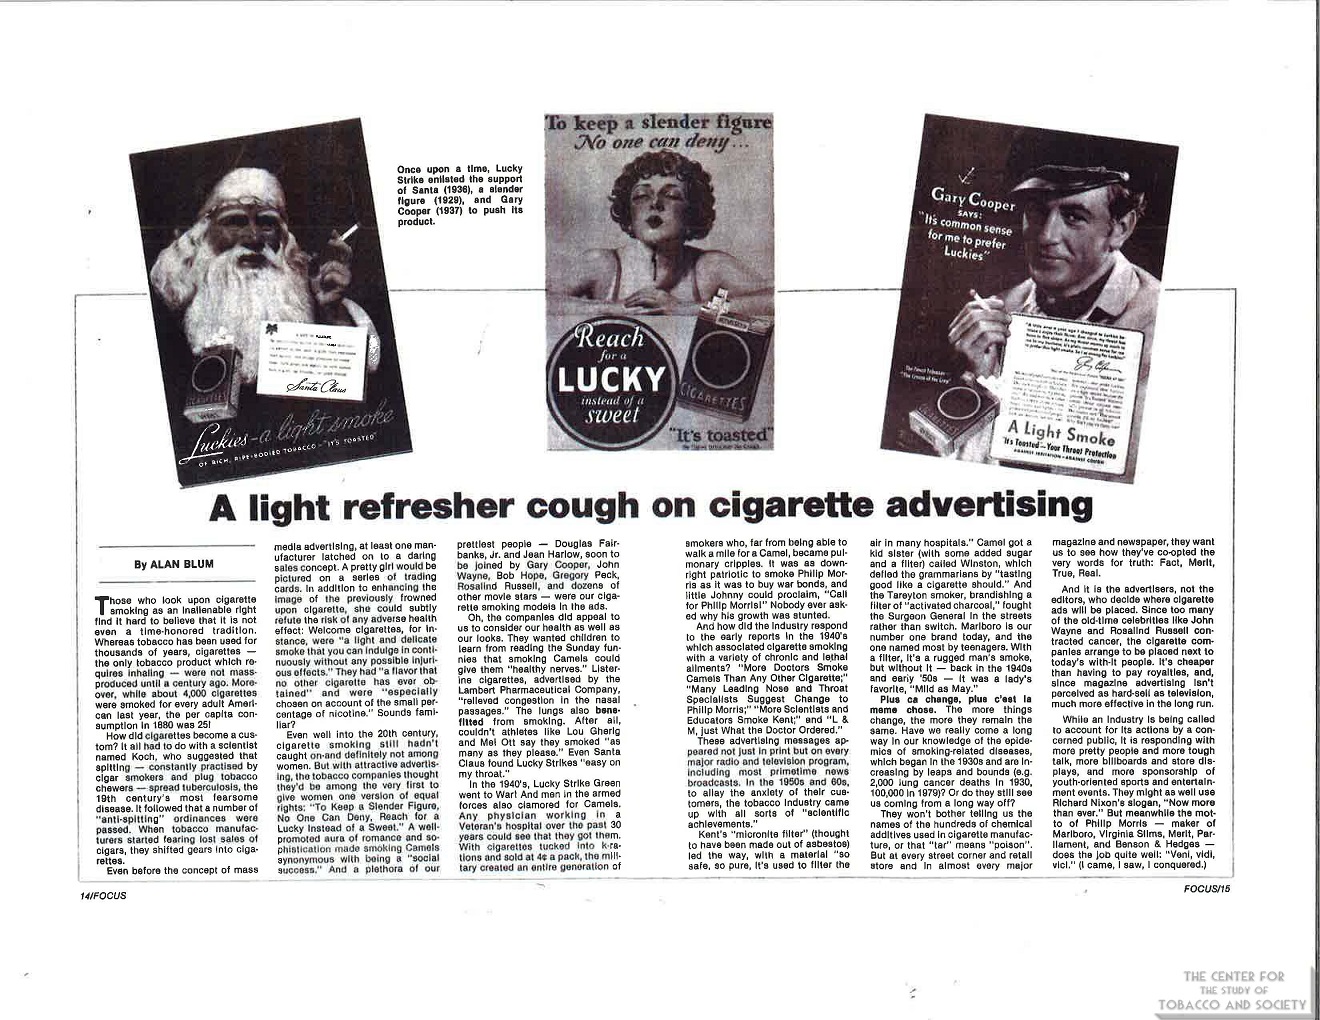 n.d. - FOCUS on Alcohol and Drug Issues - Alan Blum - A Light Refresher Cough on Cigarette Advertising